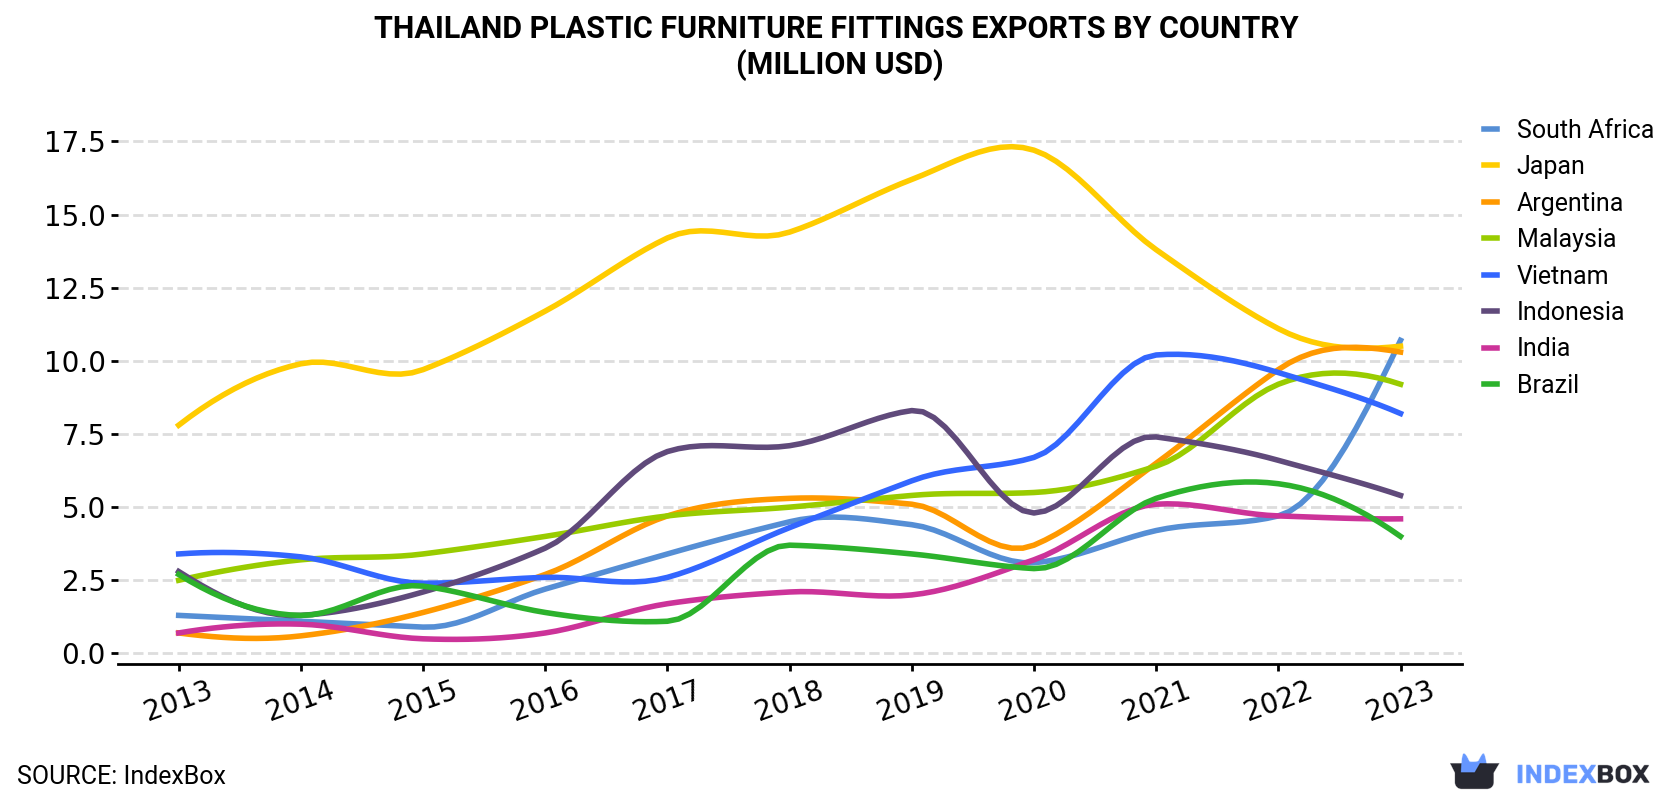 Thailand Plastic Furniture Fittings Exports By Country (Million USD)